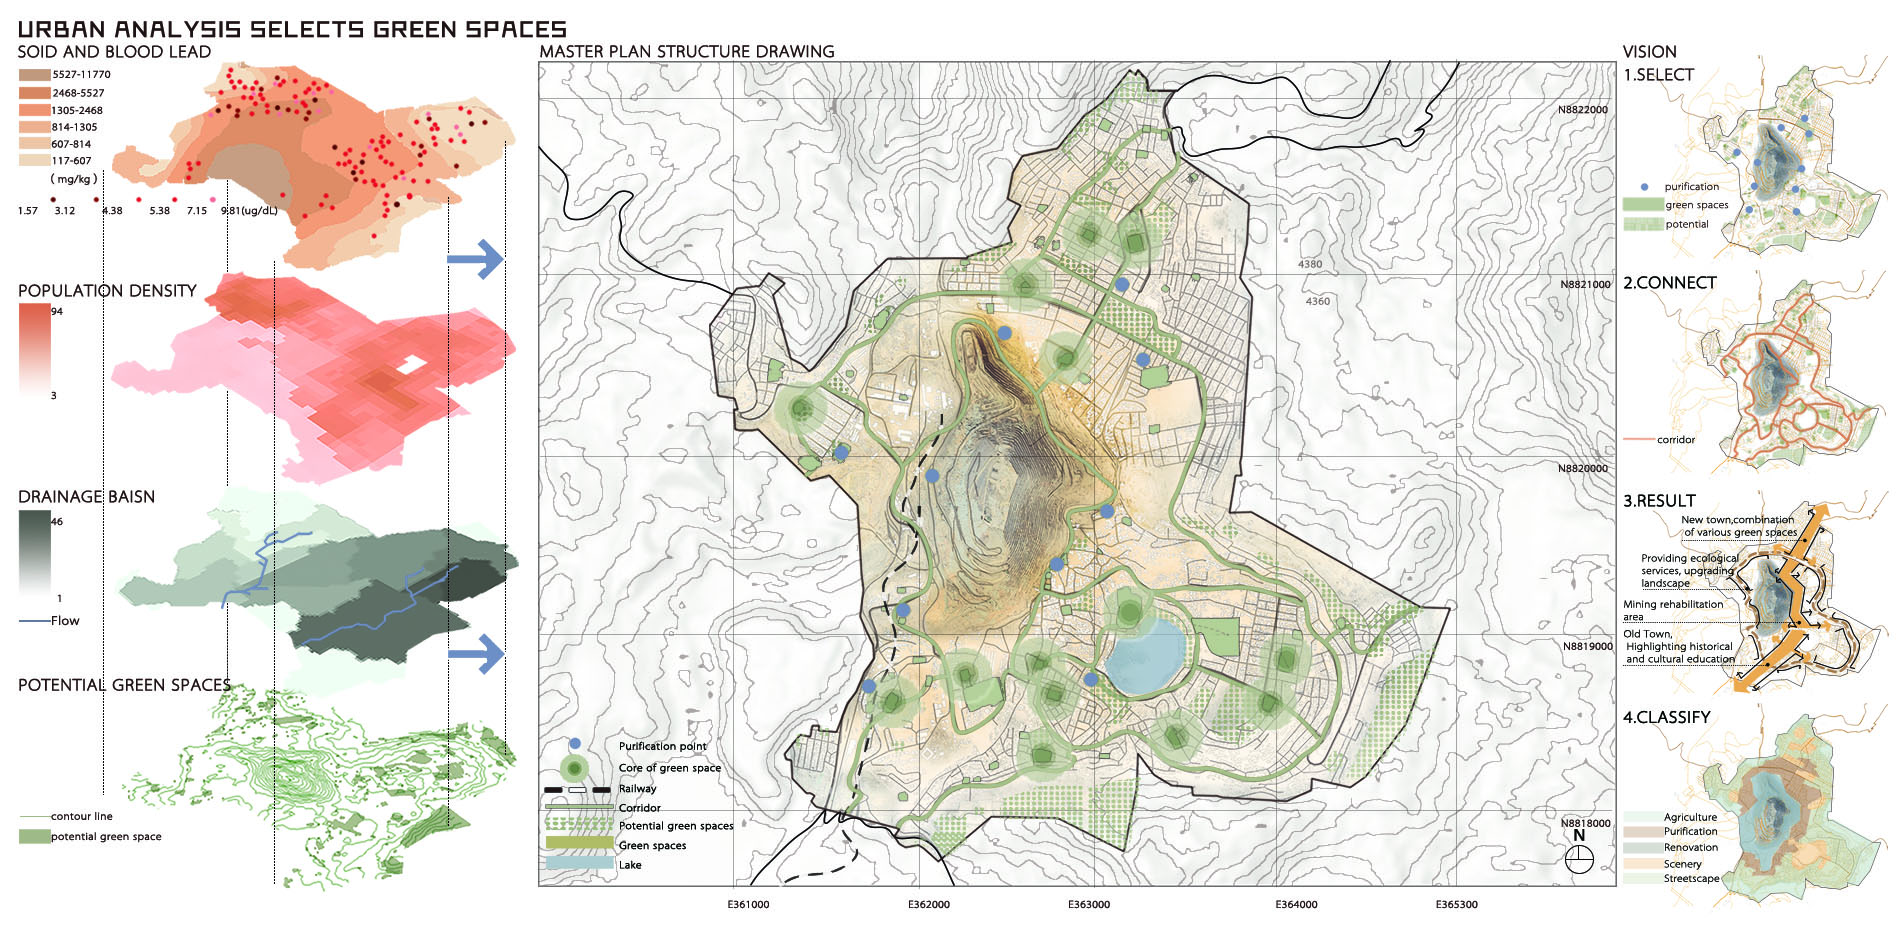 Urban analysis selects green spaces